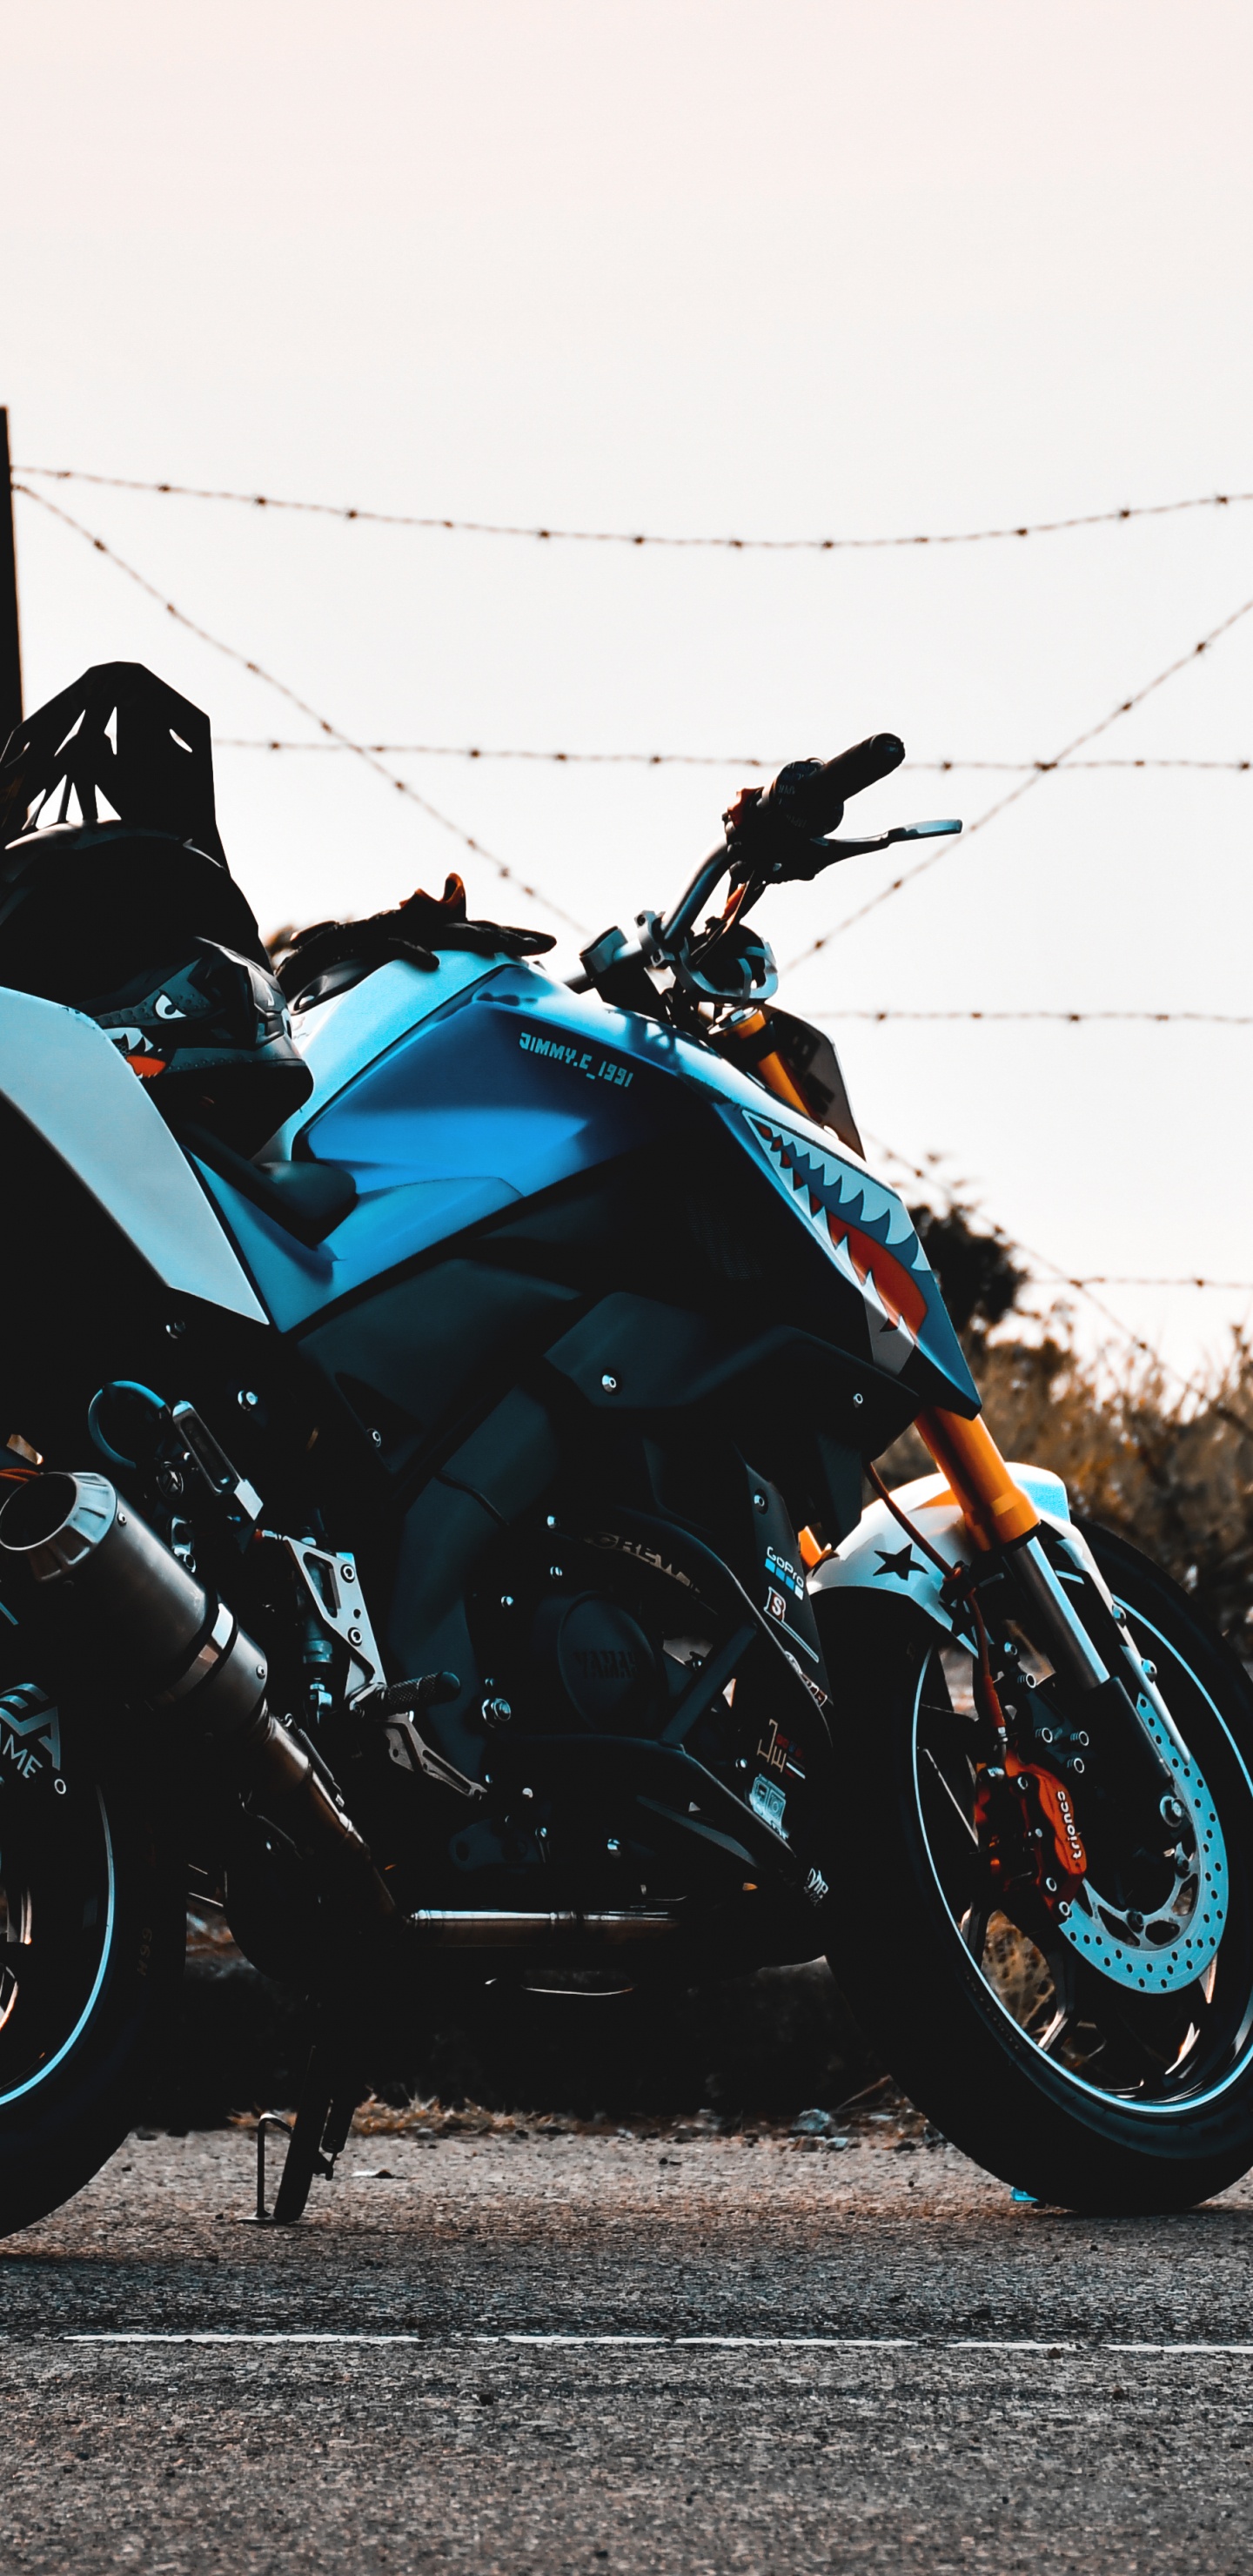 Black and Blue Sports Bike Parked on Gray Concrete Road During Daytime. Wallpaper in 1440x2960 Resolution